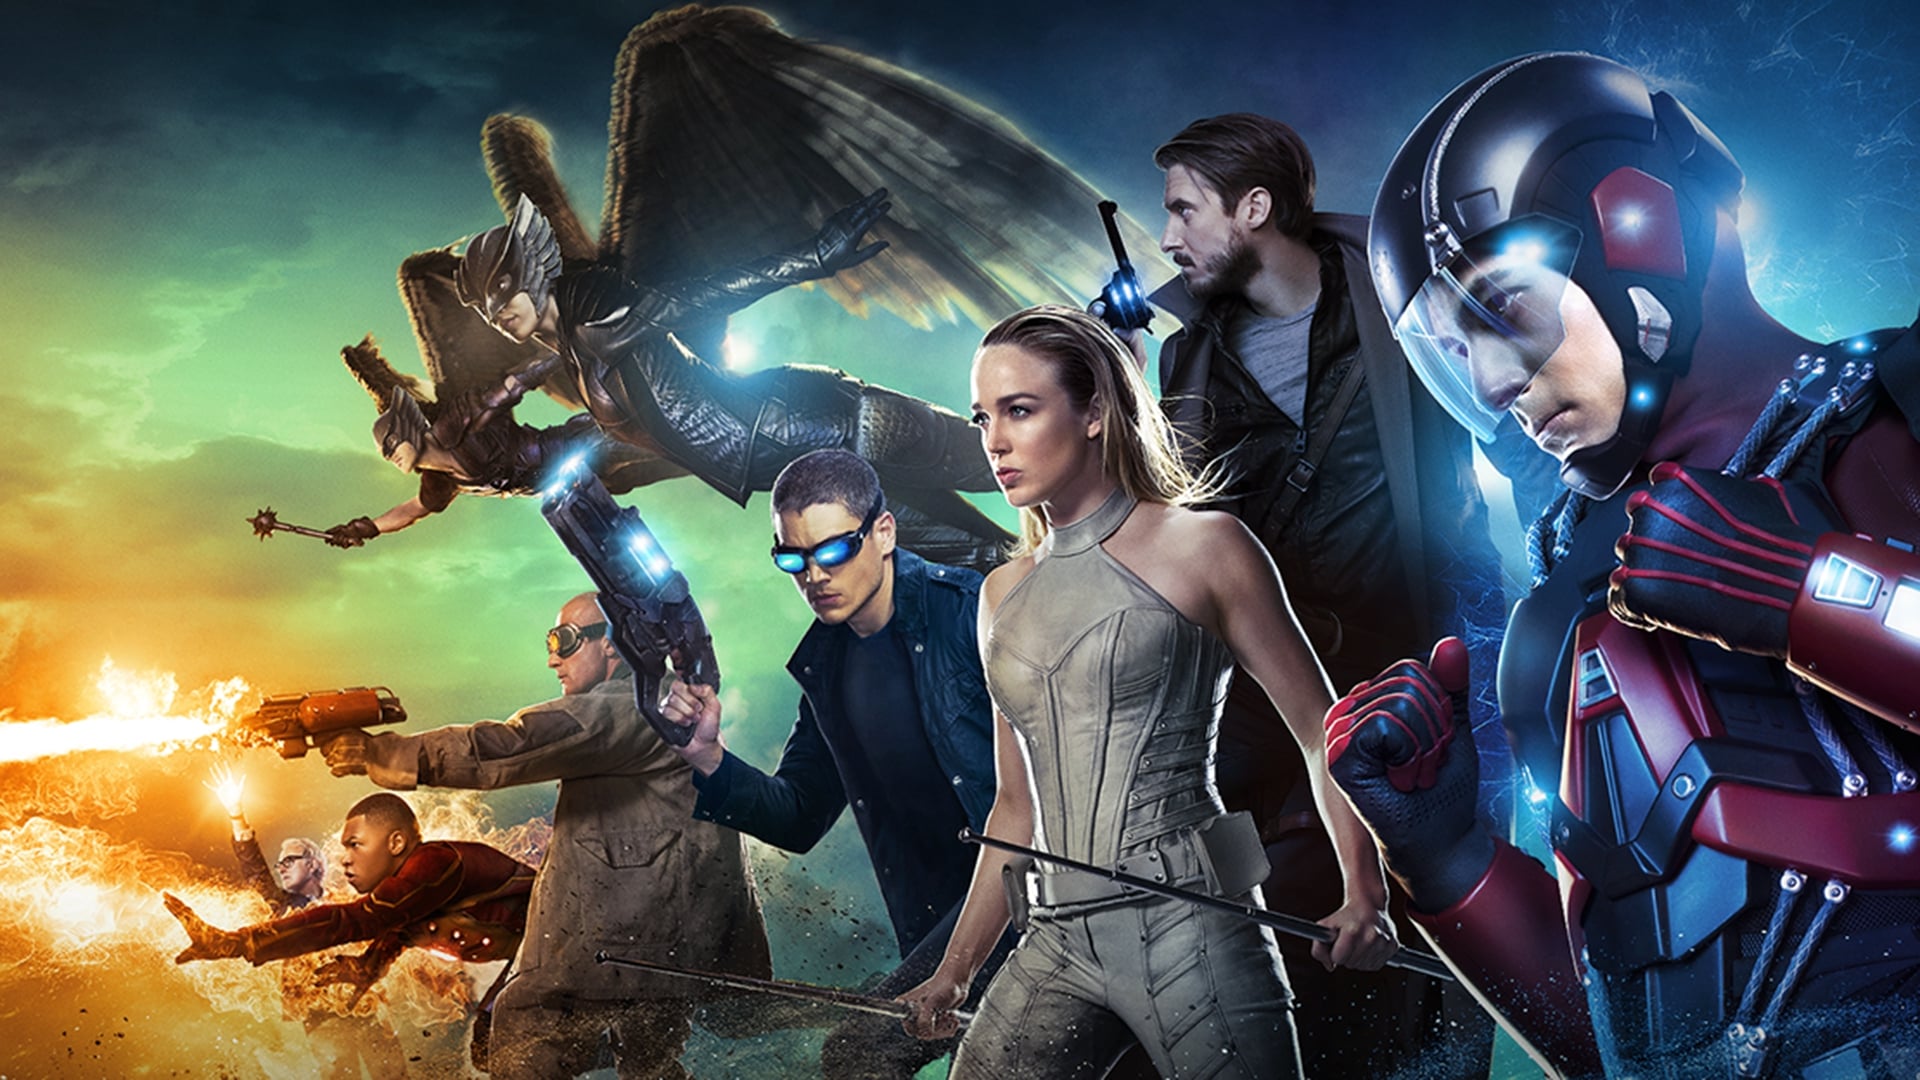 DC's Legends Of Tomorrow Backgrounds, Compatible - PC, Mobile, Gadgets| 1920x1080 px